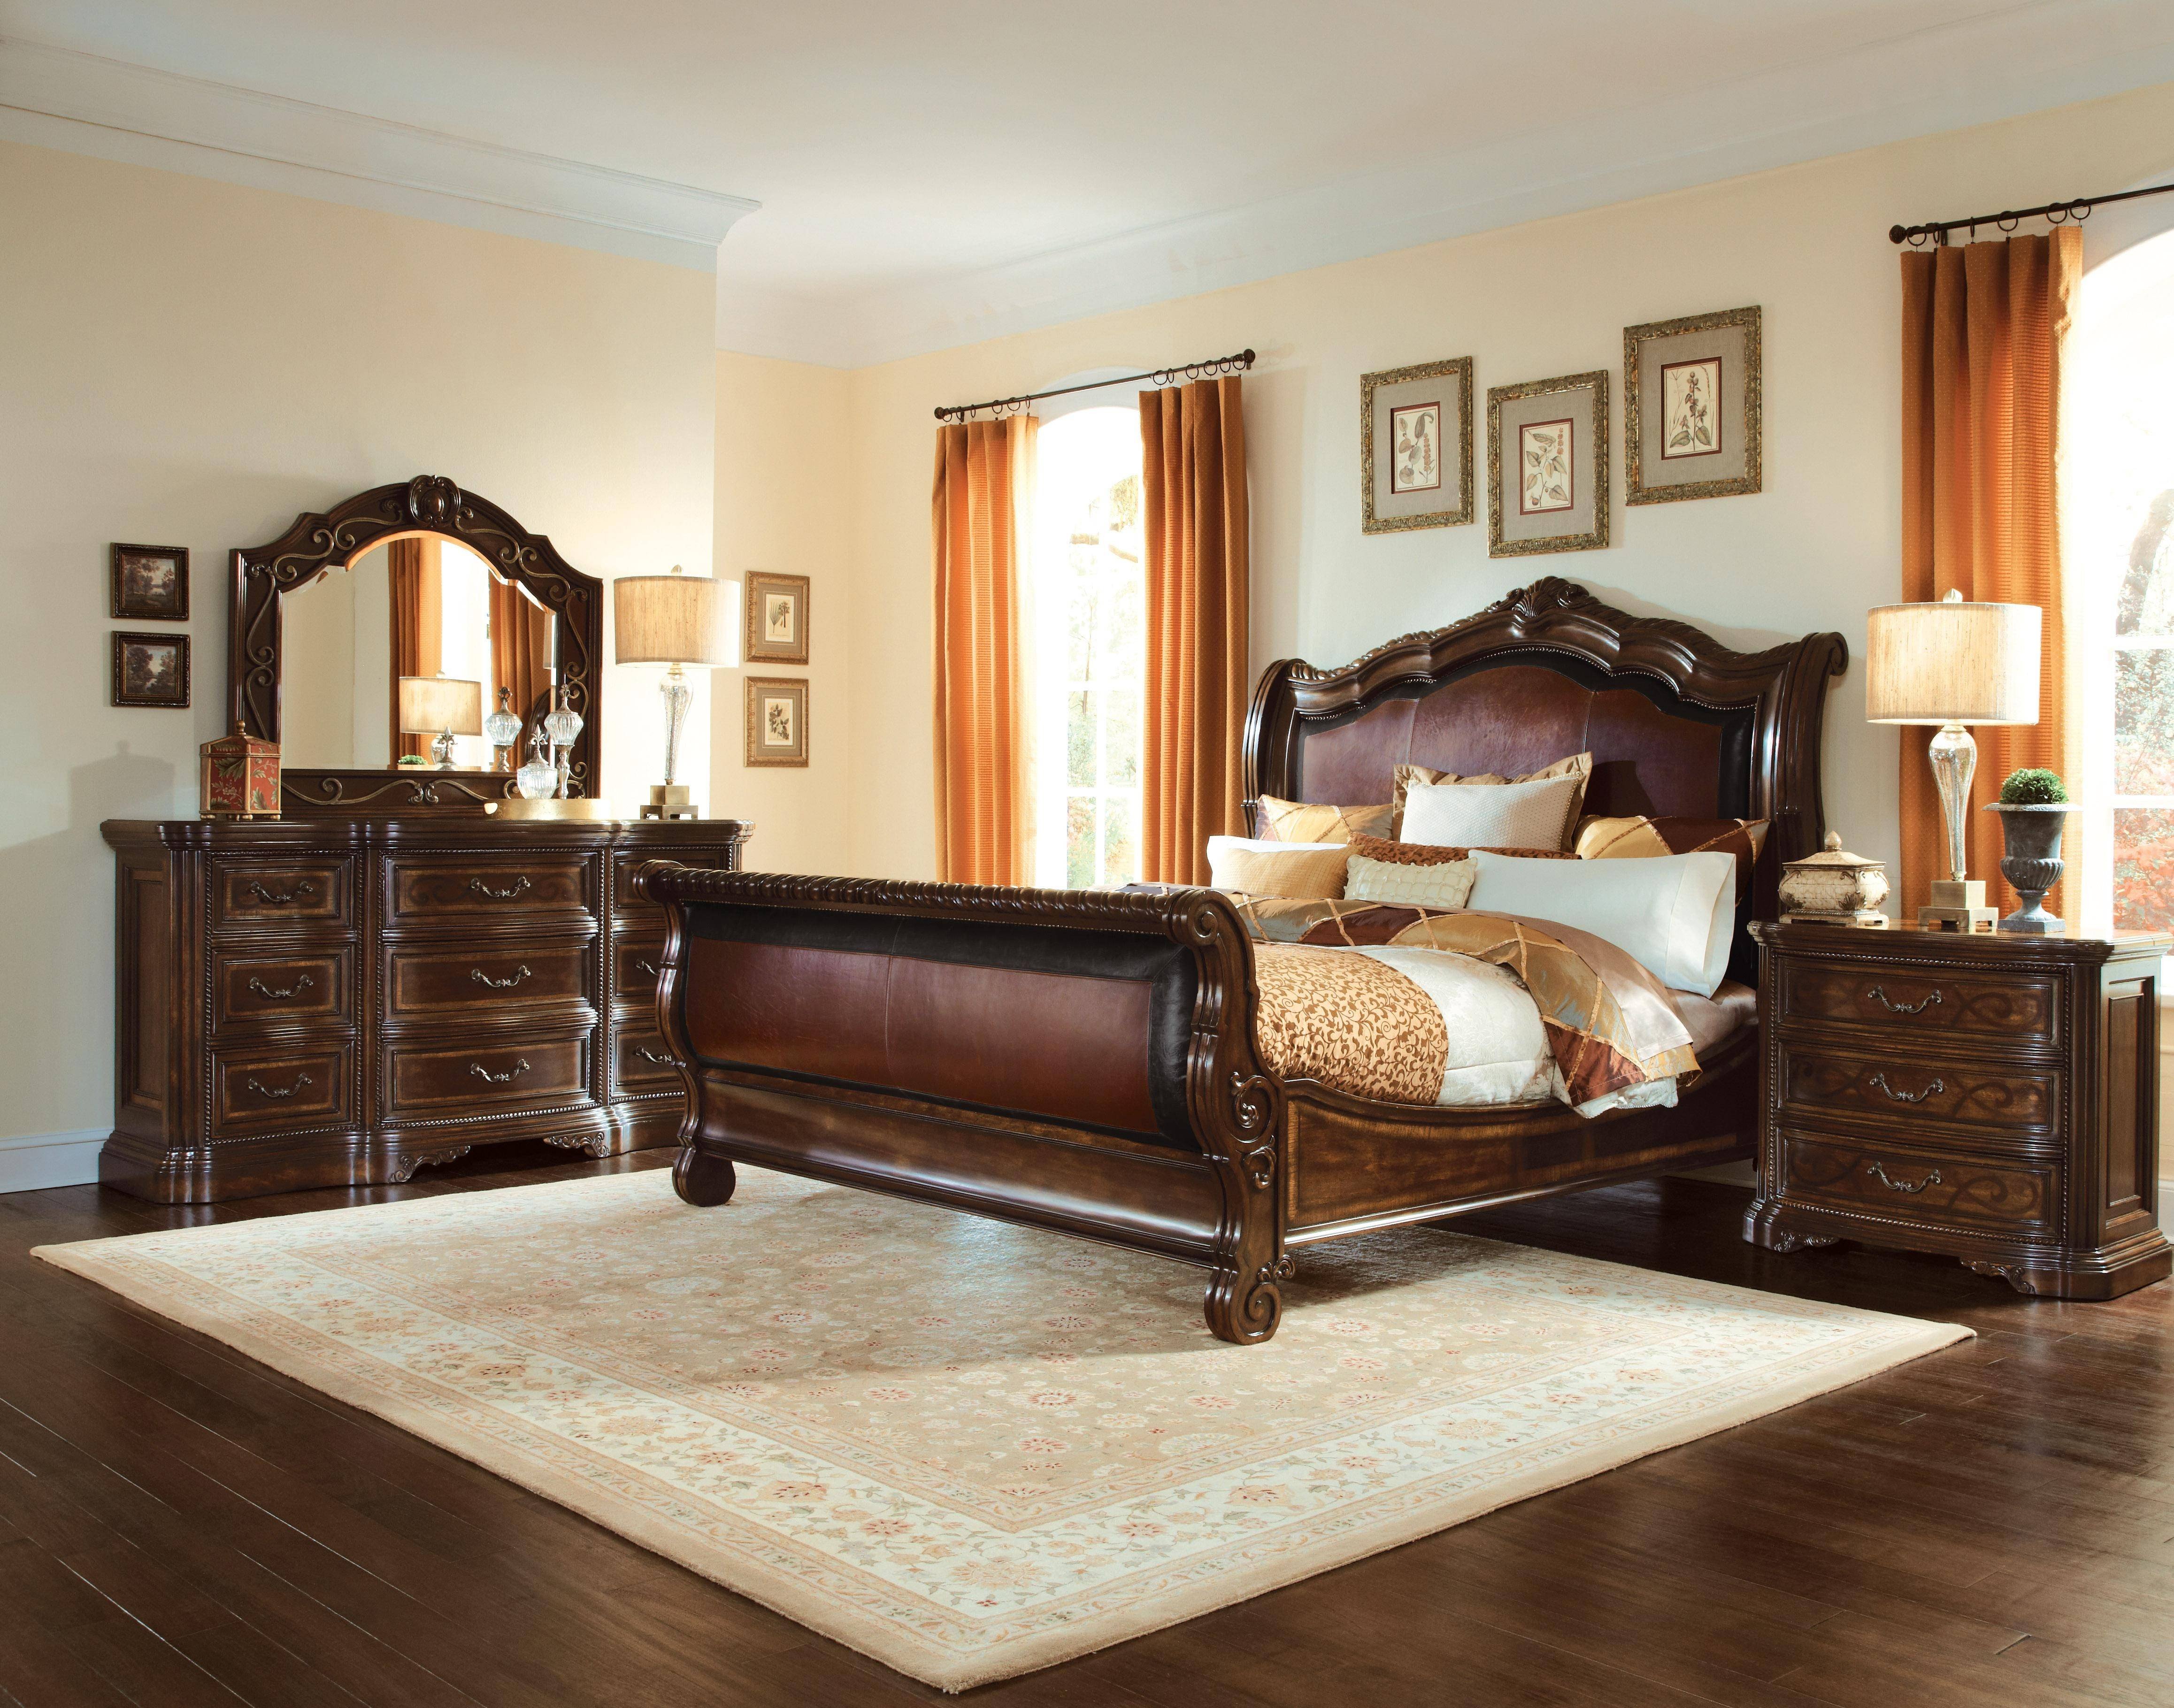 California King Size Bedroom Furniture Set Beautiful Traditional Dark Oak Faux Leather King Sleigh Bed Valencia A R T